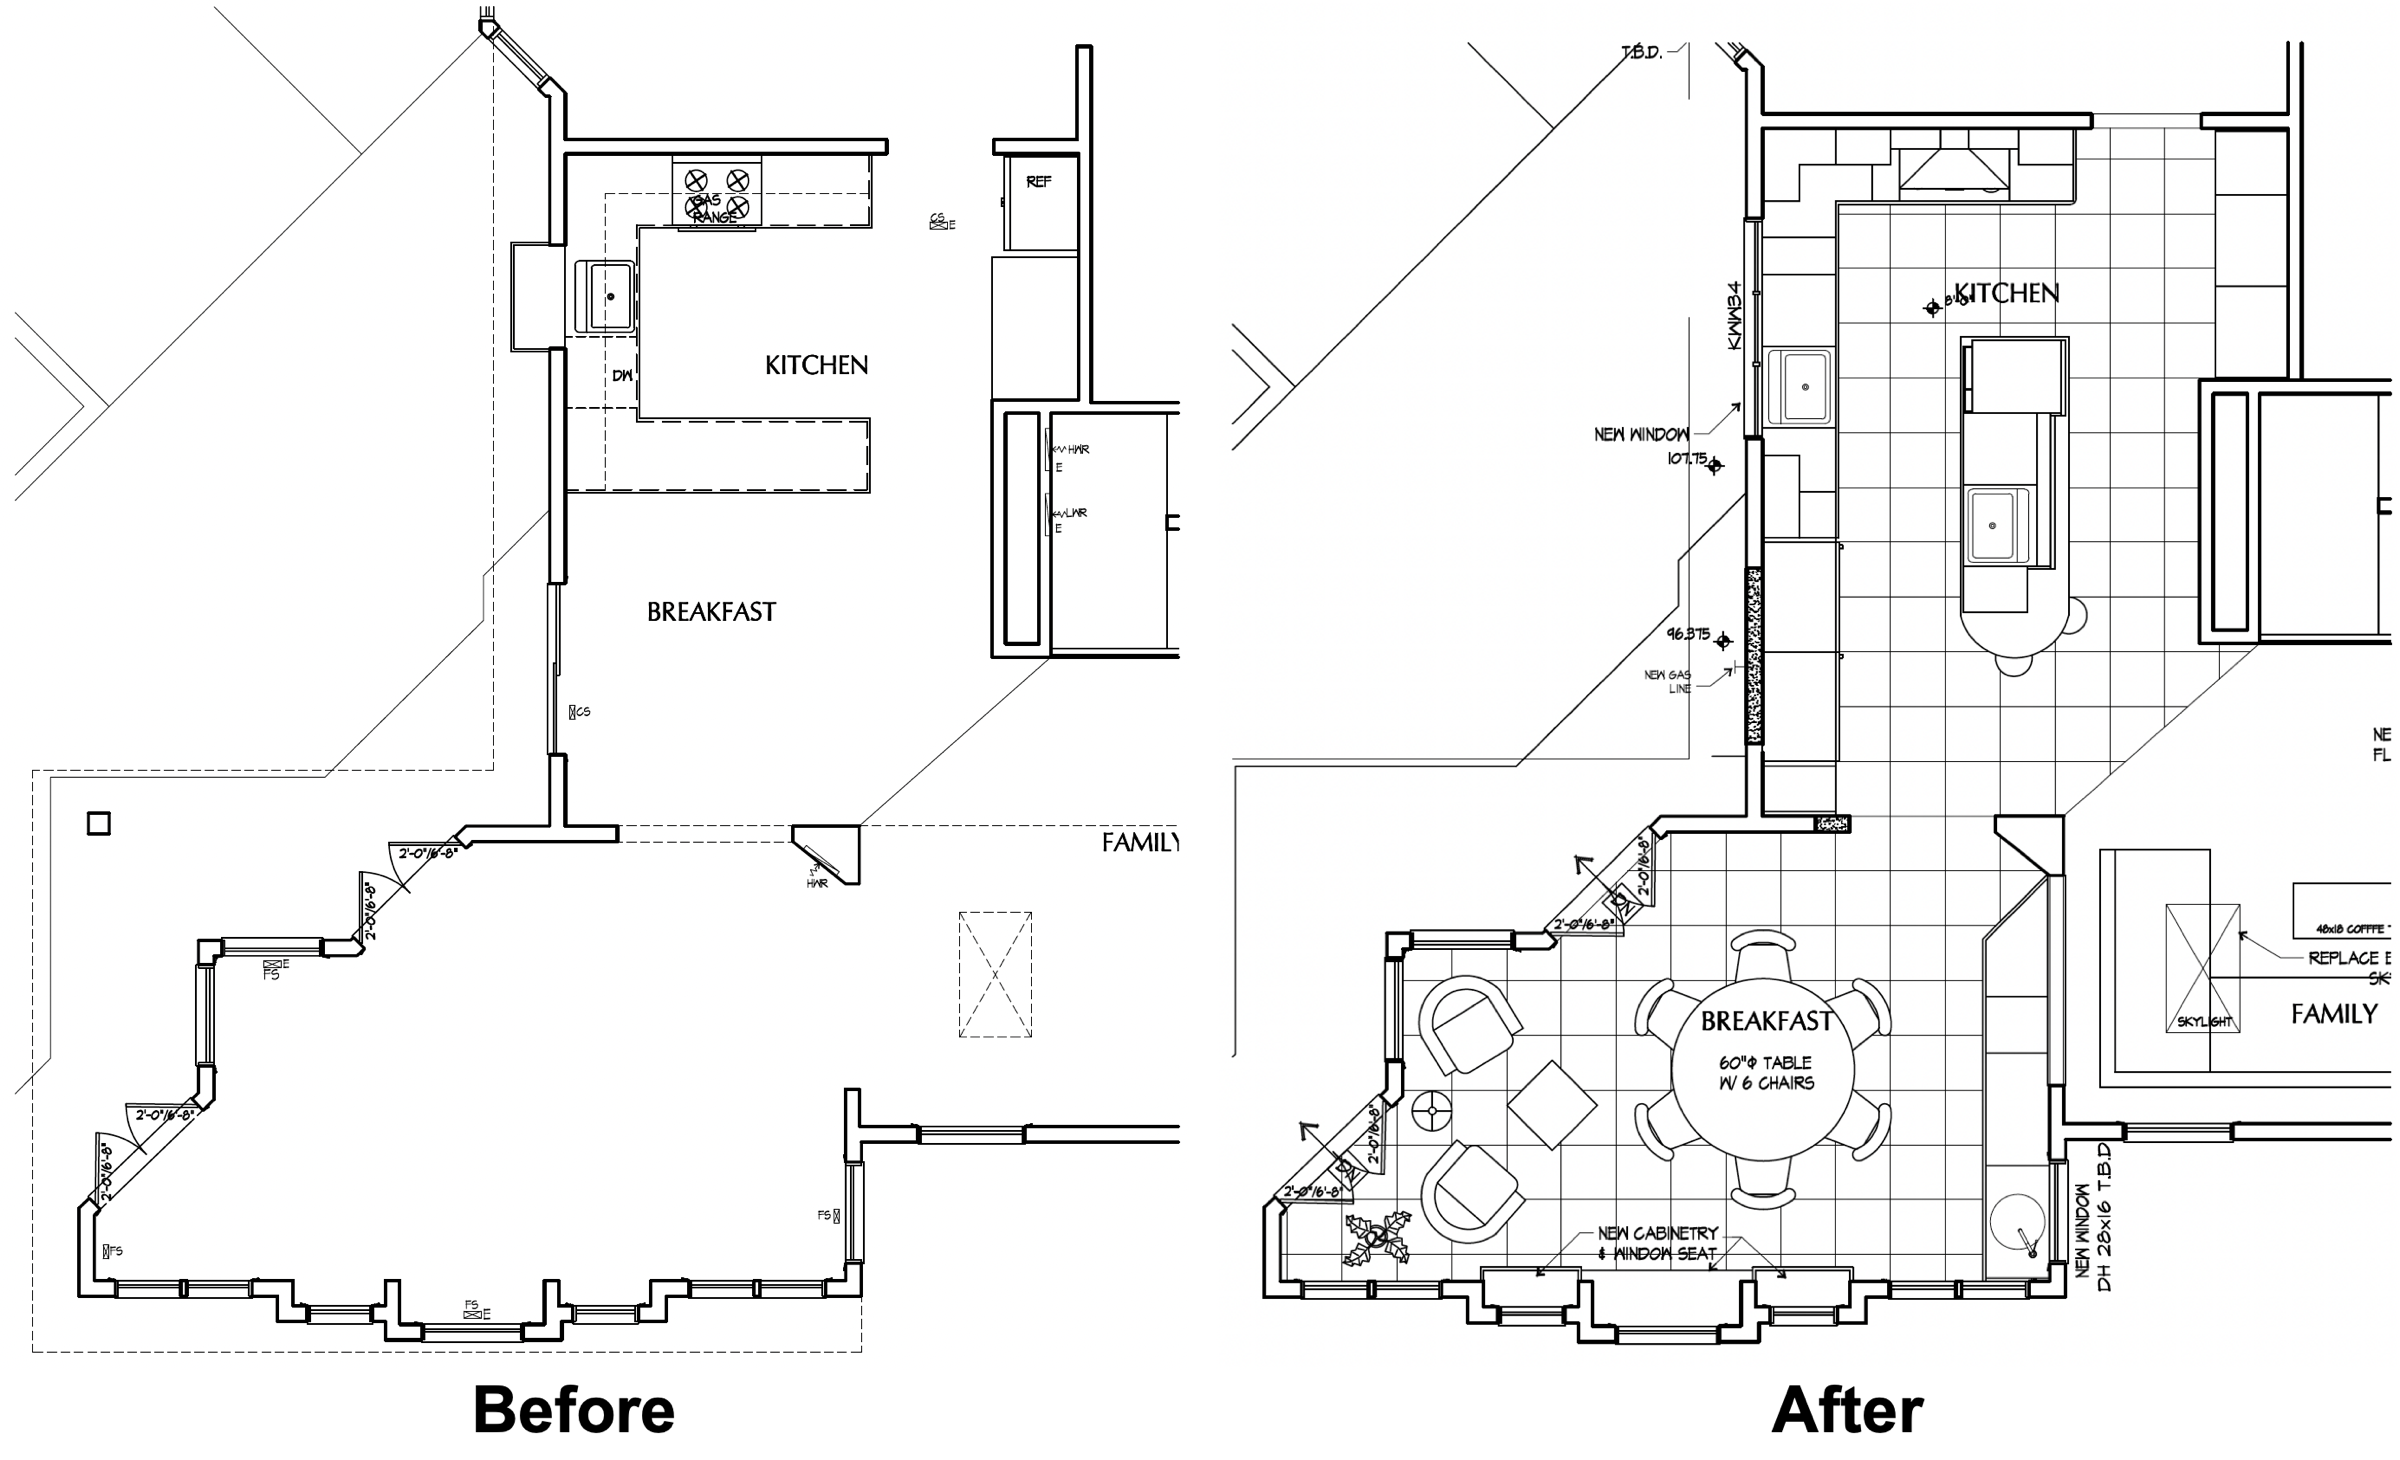 Floor plan before and after